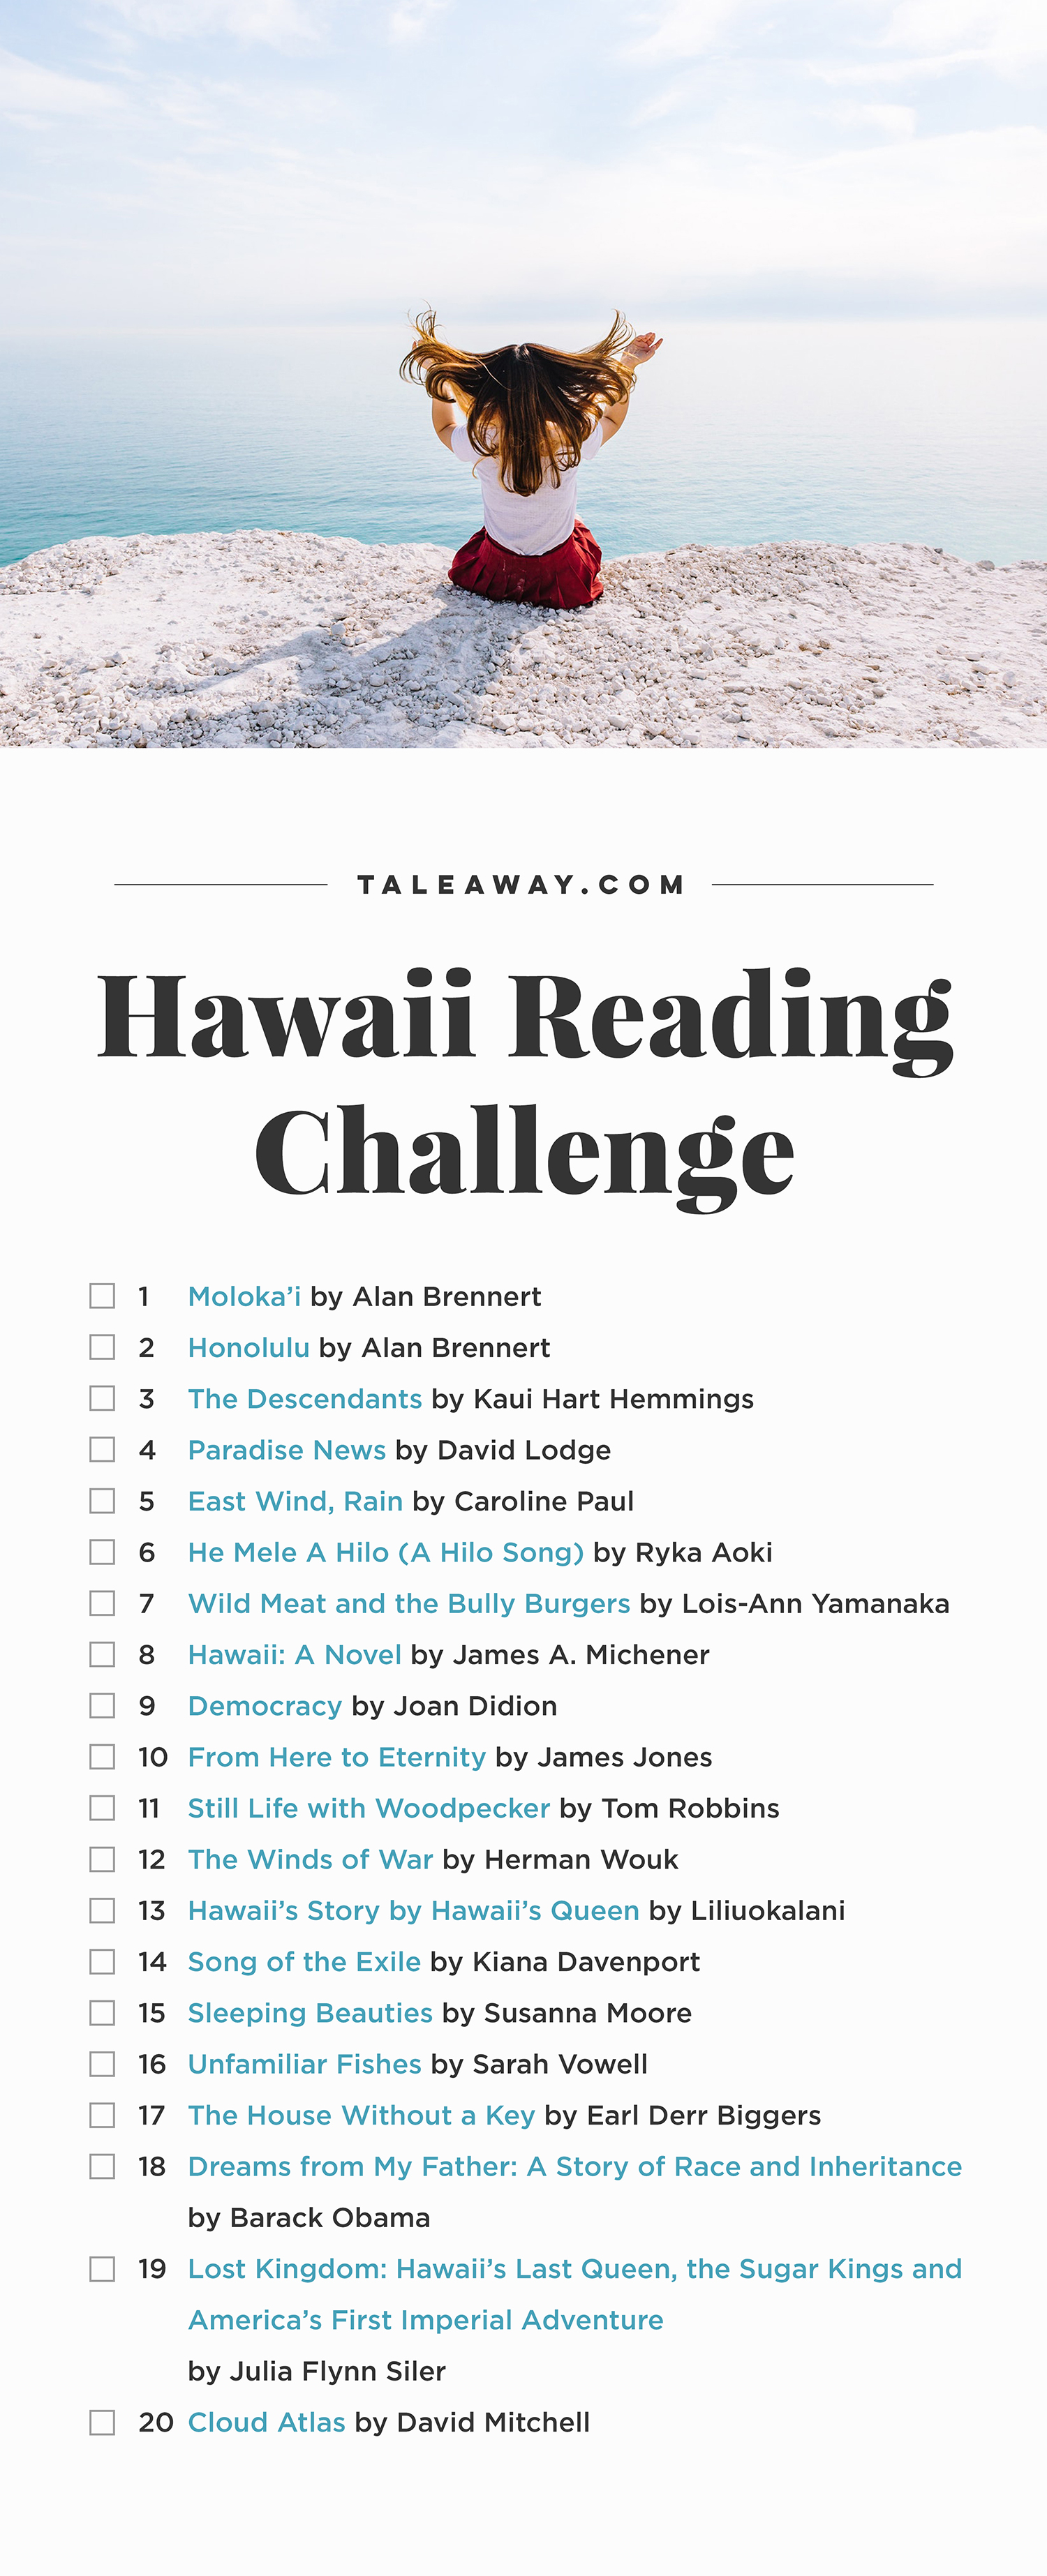 Hawaii Reading Challenge, Books Set In Hawaii - For more books visit www.taleway.com to find books set around the world. Ideas for those who like to travel, both in life and in fiction. reading challenge, hawaii reading challenge, book challenge, books you must read, books from around the world, world books, books and travel, travel reading list, reading list, books around the world, books to read, hawaii books, hawaii books novels, hawaii travel